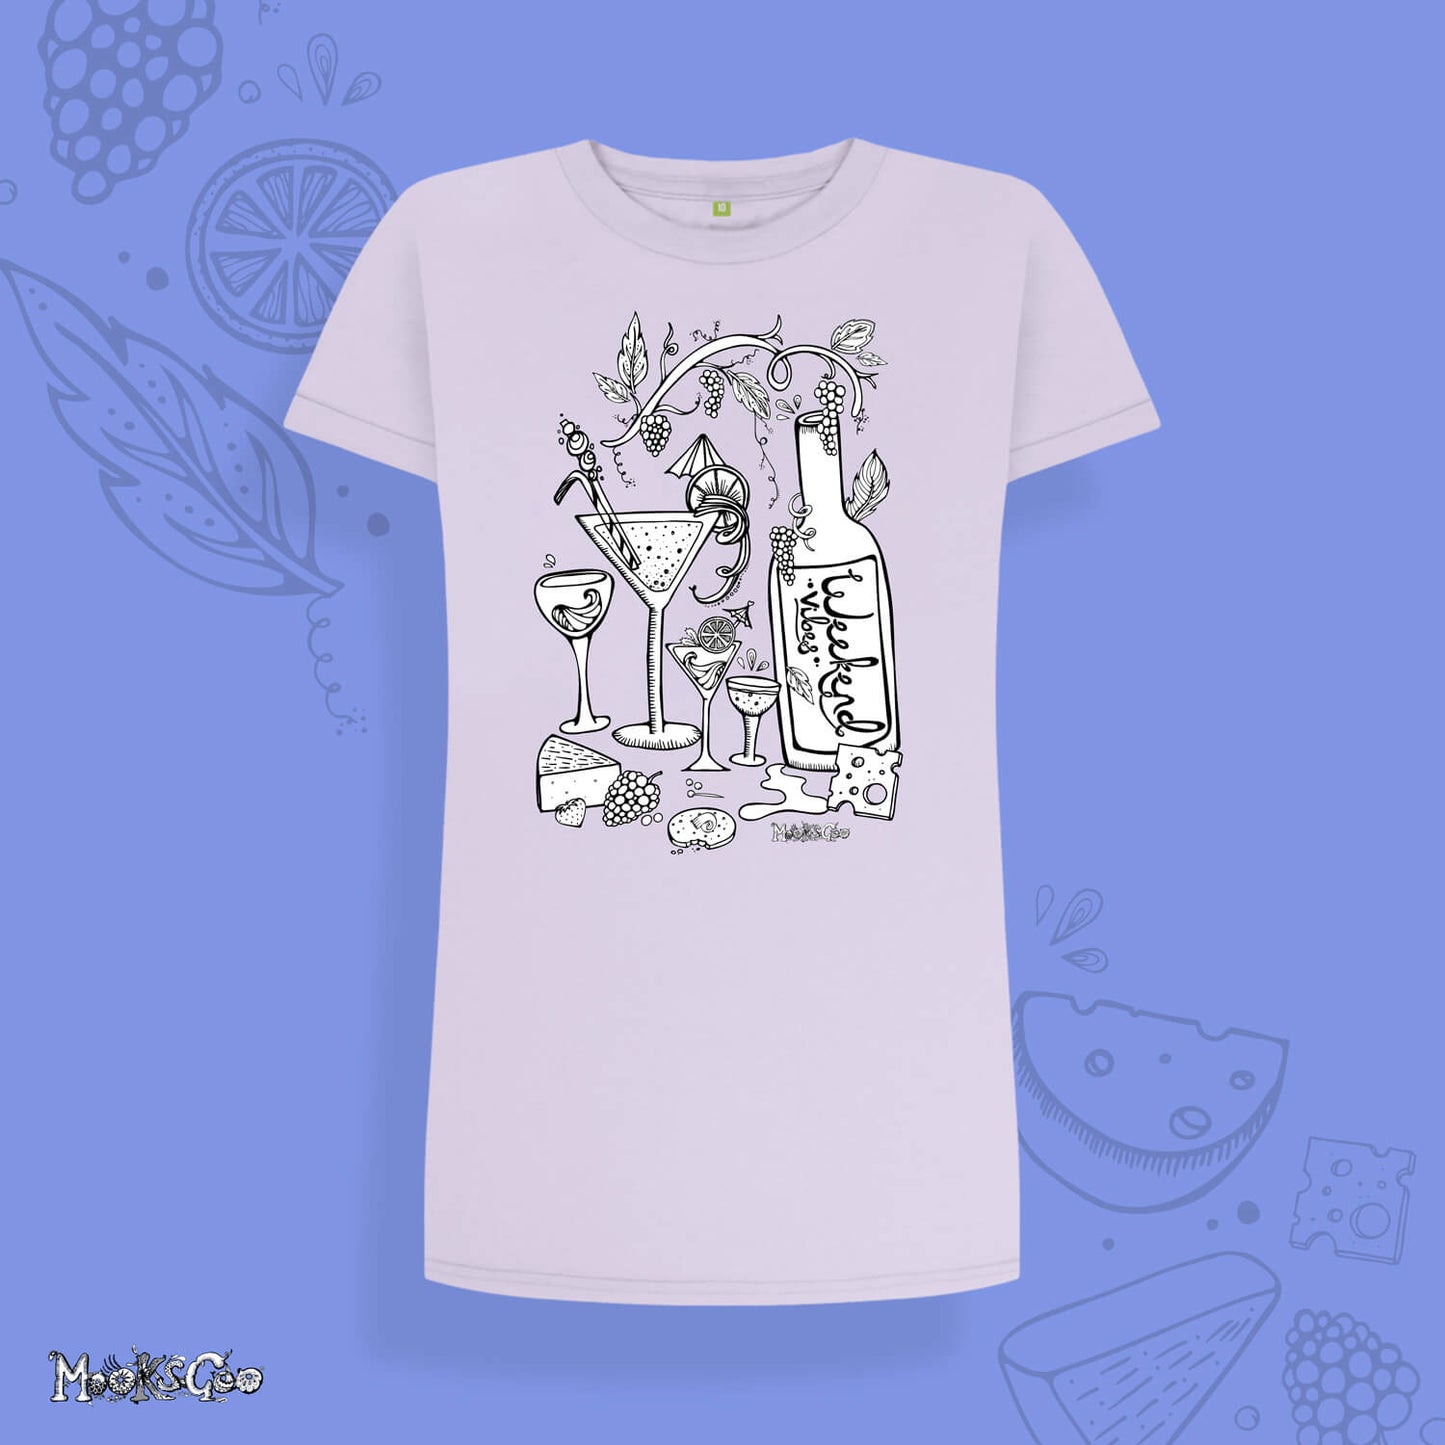 Violet oversized t-shirt dress with bold black and white picture of cheese and wine themed illustration on a long, oversized and relaxed t-shirt dress. It shows a bottle of wine, cocktails, brie cheese, grapes and biscuits - great for a girly night in clothing. Designed by MooksGoo  